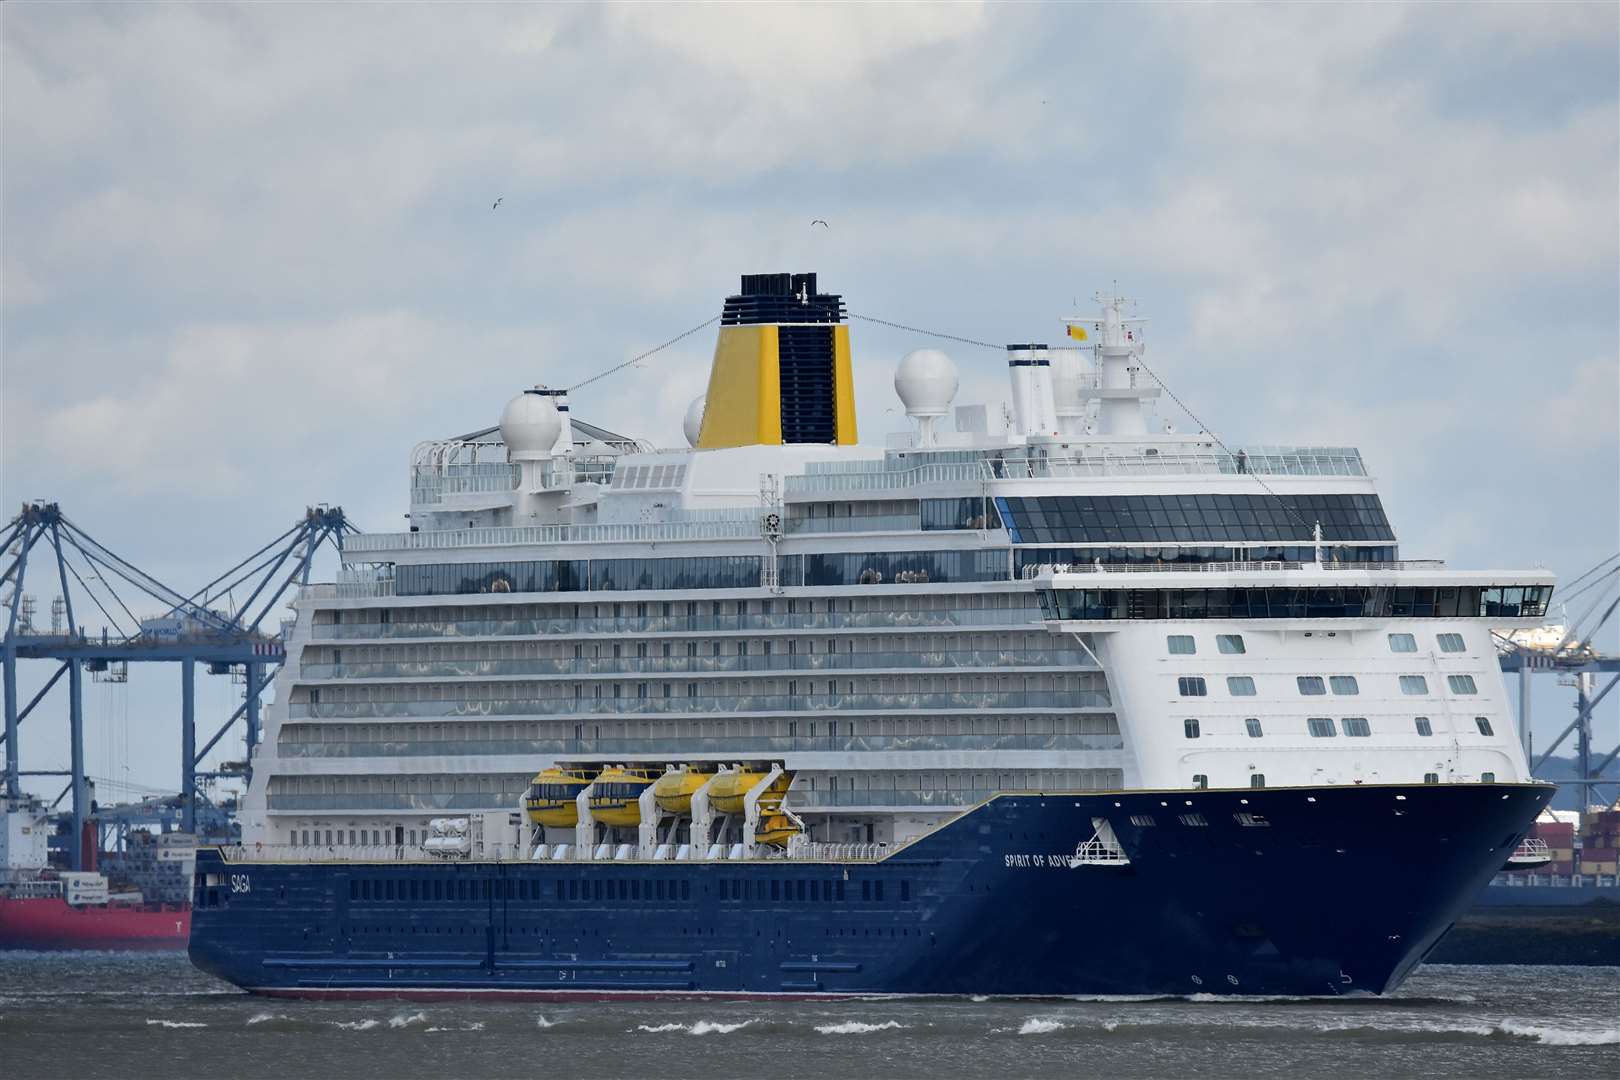 The ship boasts a gross tonnage of 58,250 and can accommodate 999 passengers. Picture: jason.photos